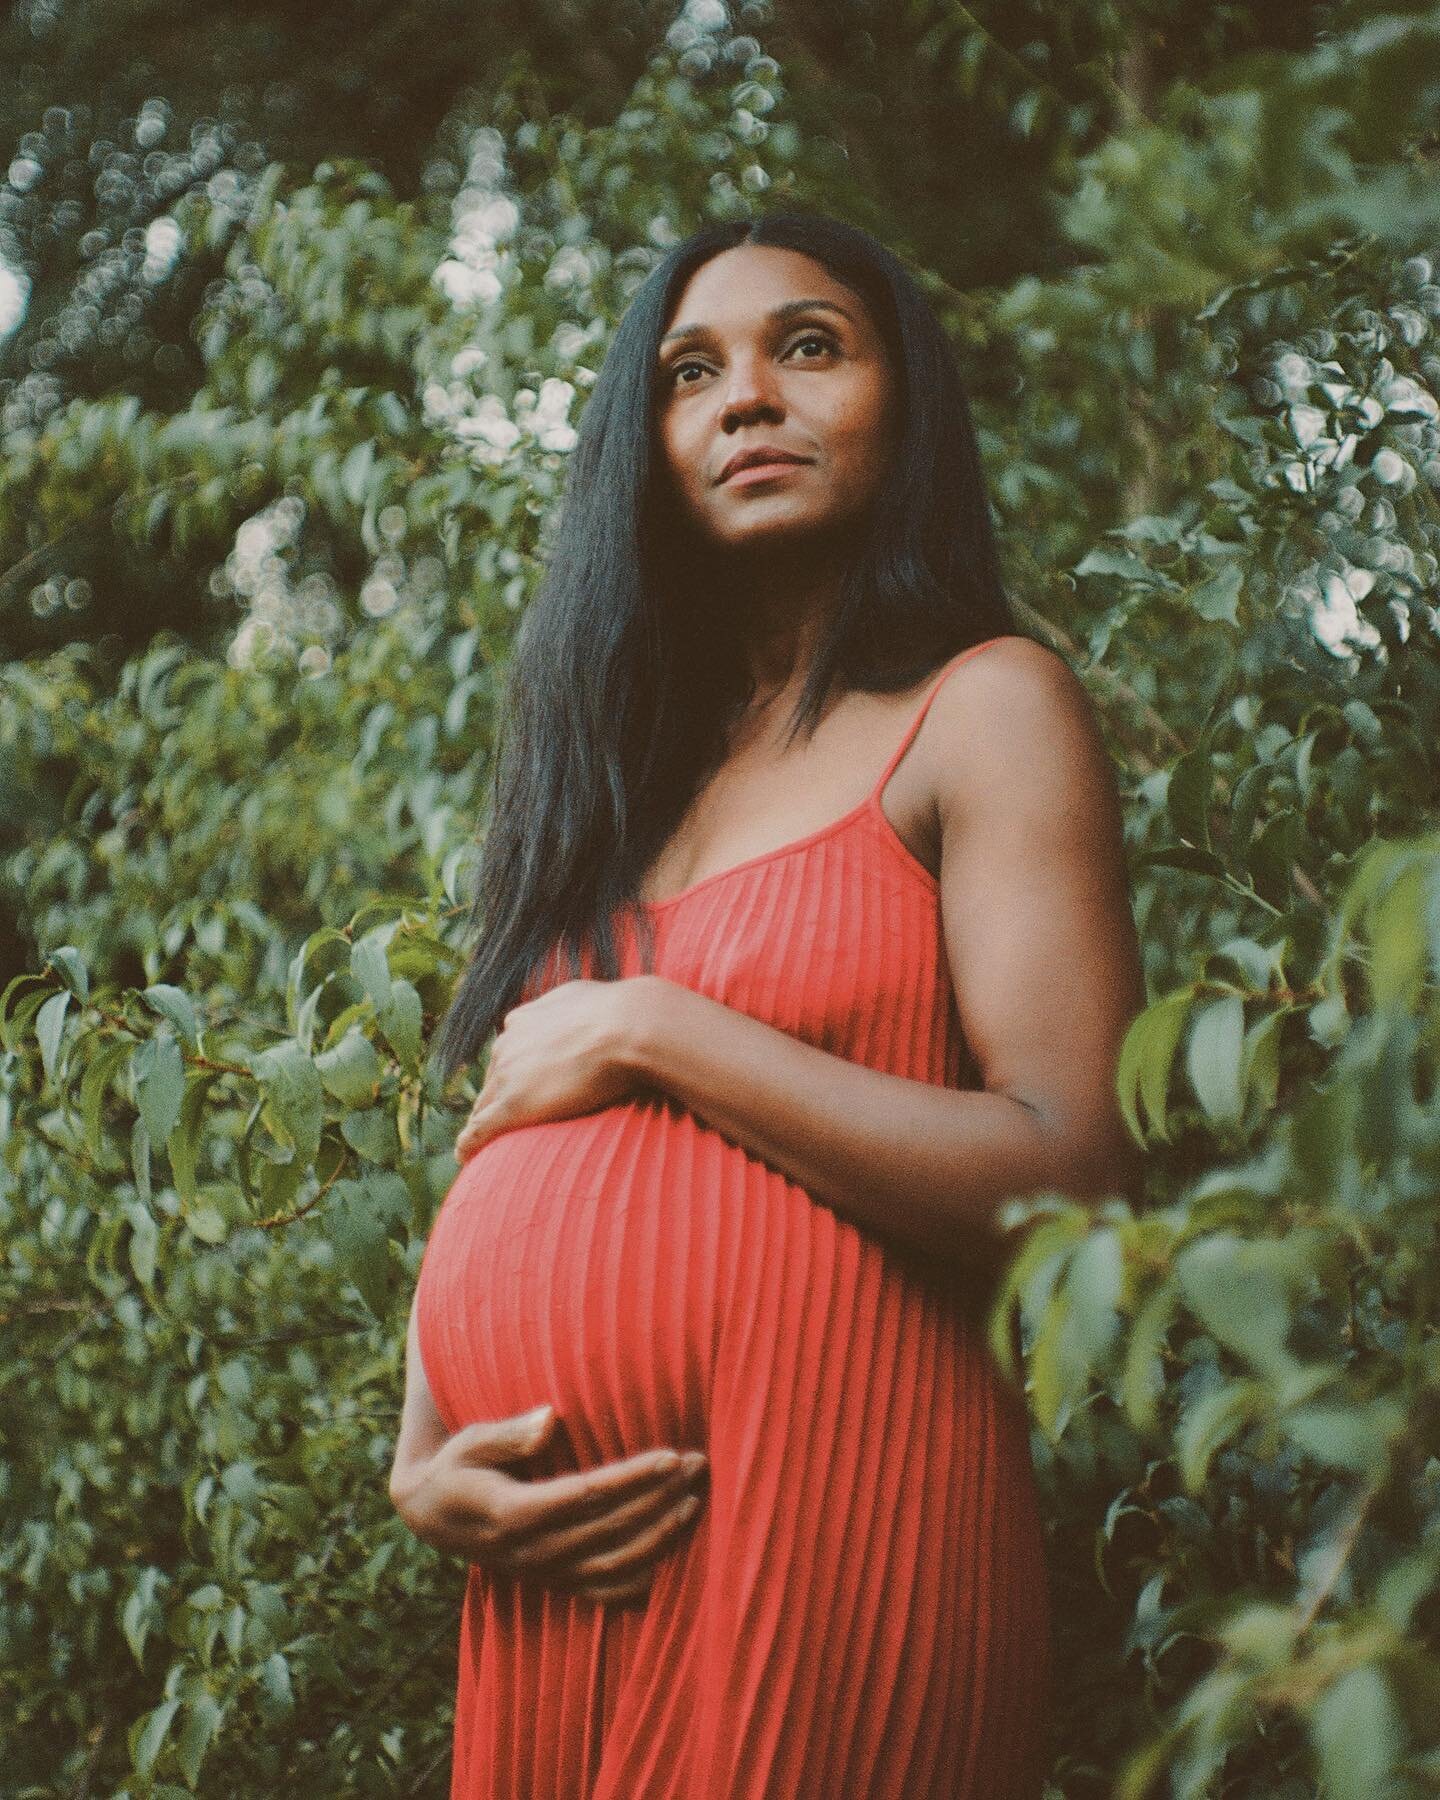 This body is my home. 

Photo| @ellenbhansen 

.
.
.
.
.
#love #blackmama #mothers #realtalk #pregnancy #fullheart #babygirl #bless #grateful #freedom #thislife #naturals #ishare #momlife #IAMAMOTHER #family #lookslikefilm #filmphotography #thrive #w